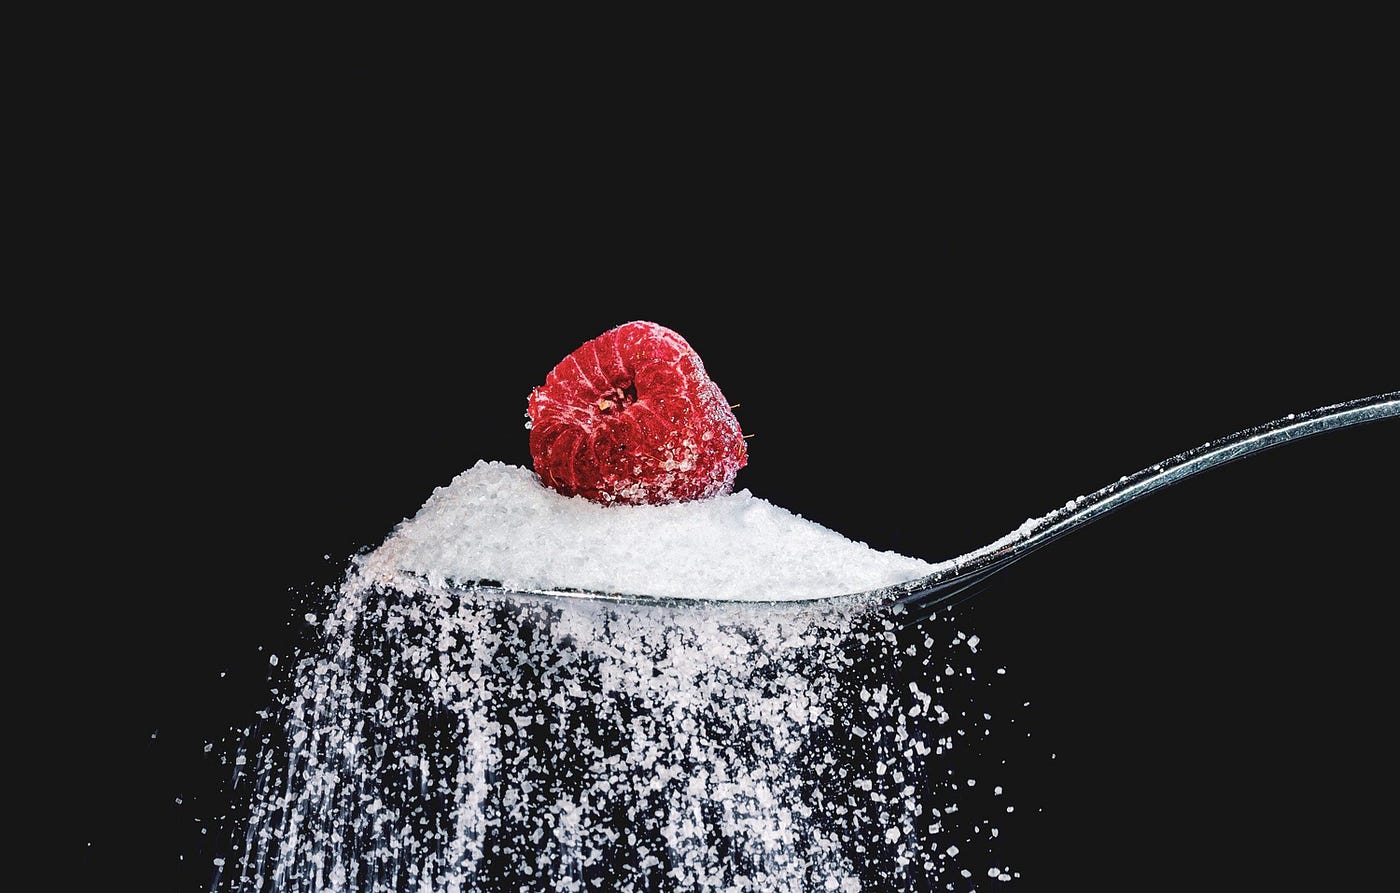 A spoon emerges from the right, filled with sugar spilling over the edge. The sugar has a raspberry perched on top of it. Black background. Exercise can help with type 2 diabetes.